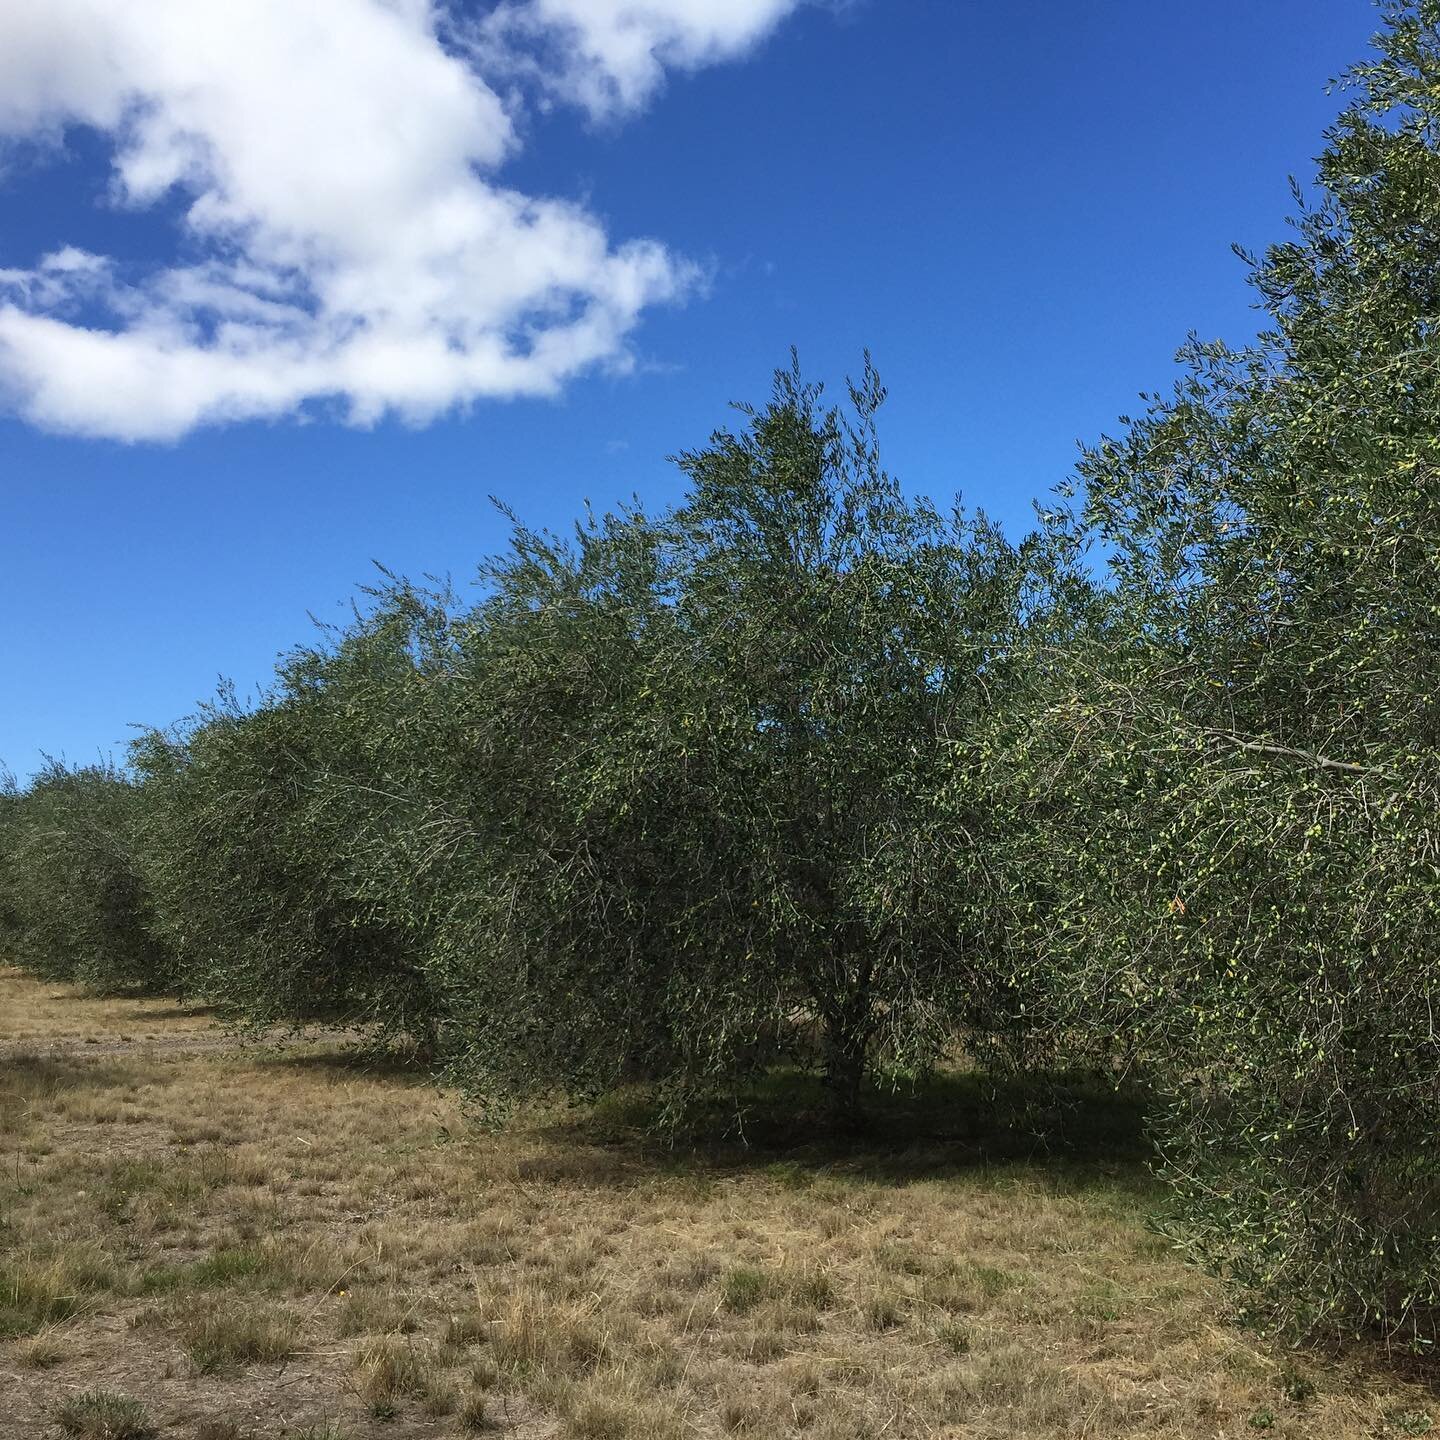 The olives are developing beautifully this fine autumn... harvest will be in May, limited edition EVOO will be ready to purchase in July 🌿 #demetercertified #biodynamicfarming #uptongroveruffy #uptongrove #oliveoil #olivegrove #strathbogieranges #bi